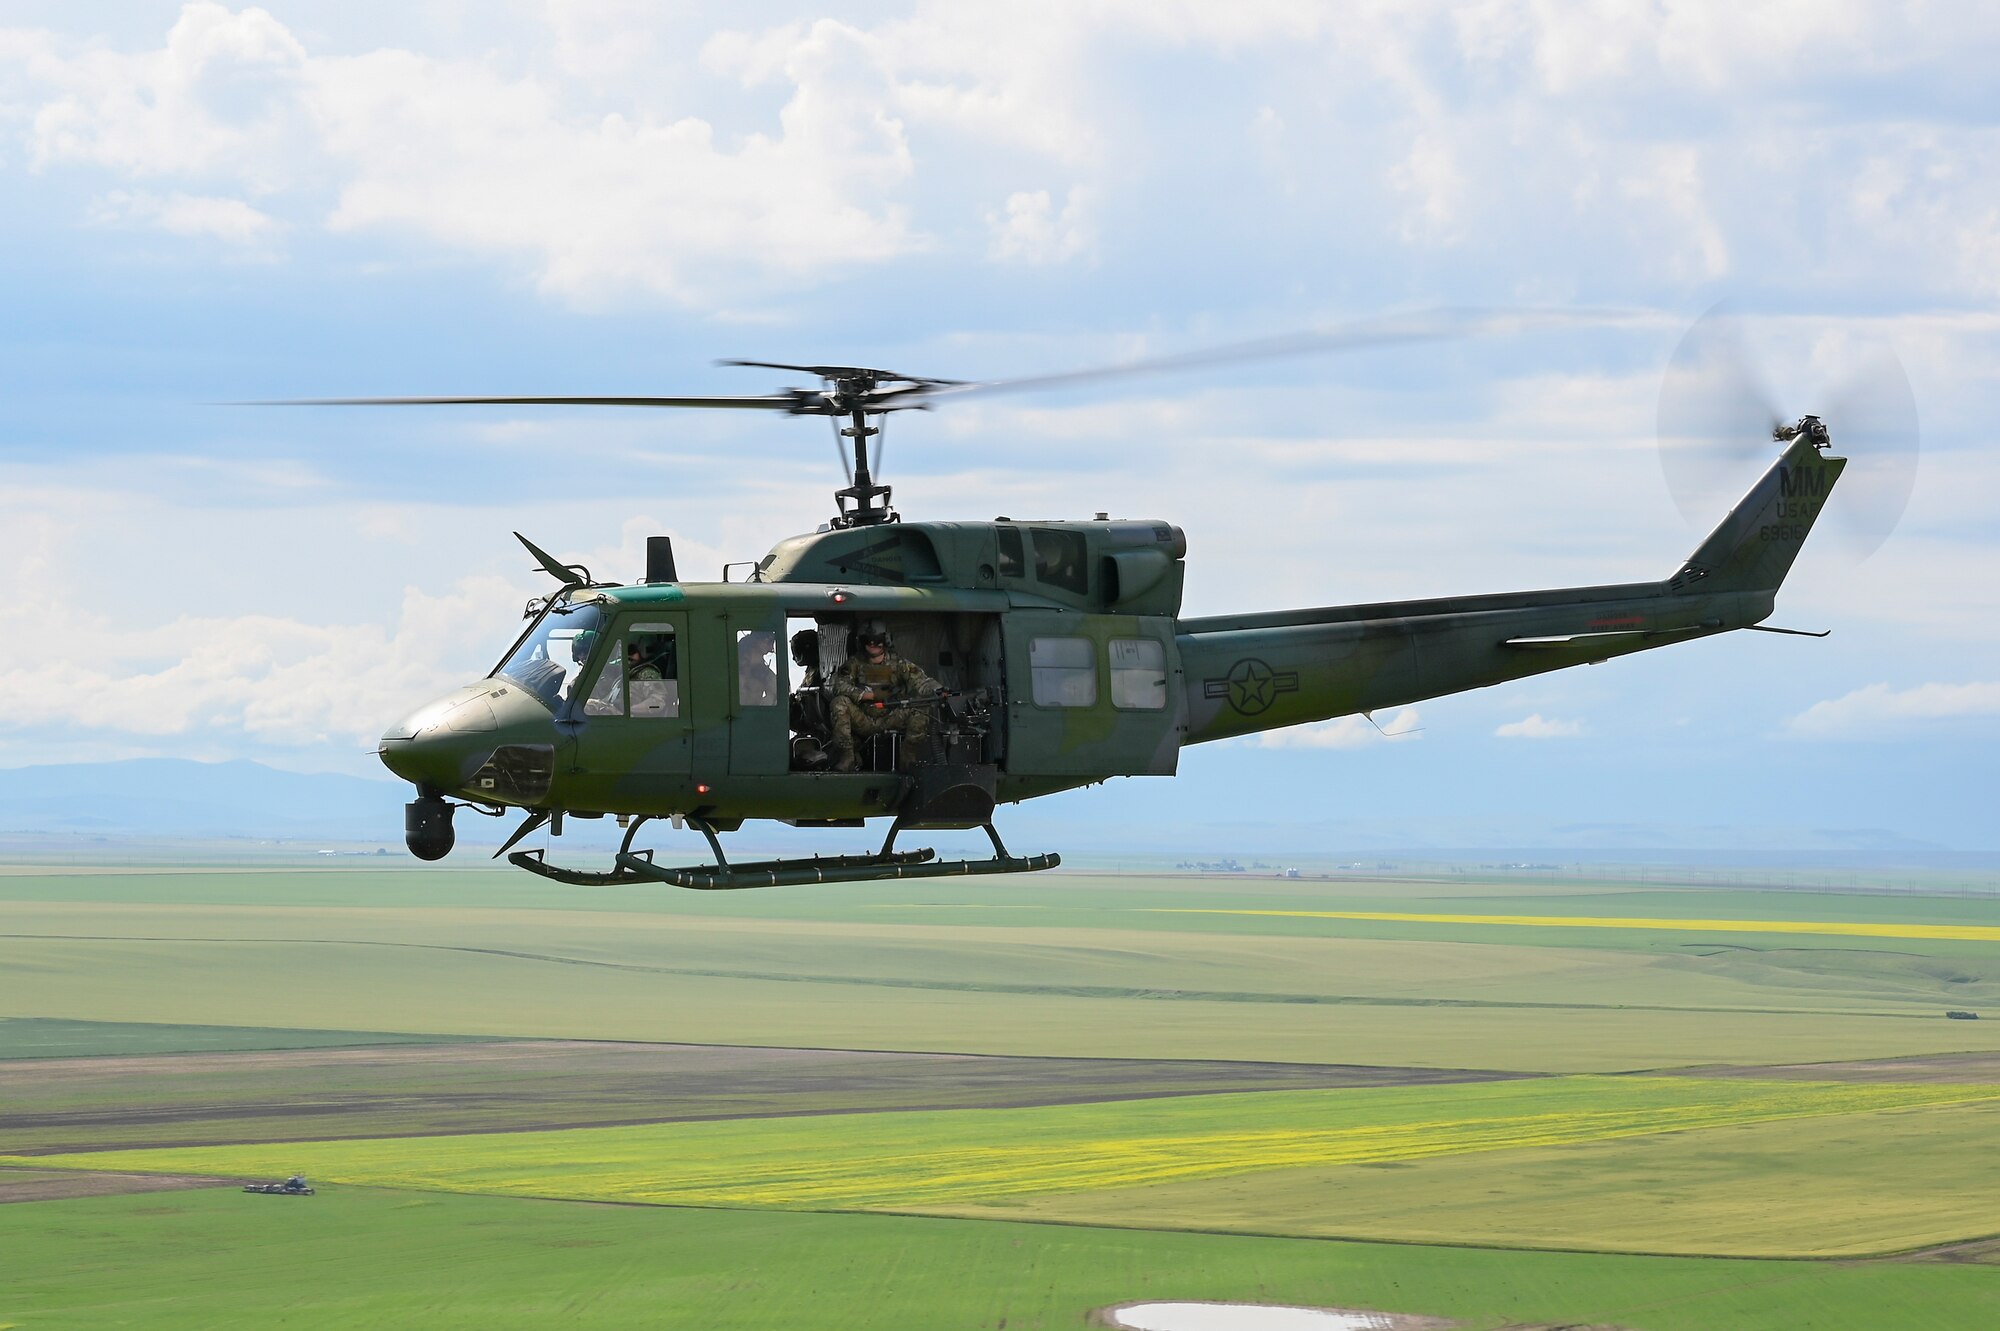 A UH-1N Huey helicopter flies against blue sky over green patches of farmland.